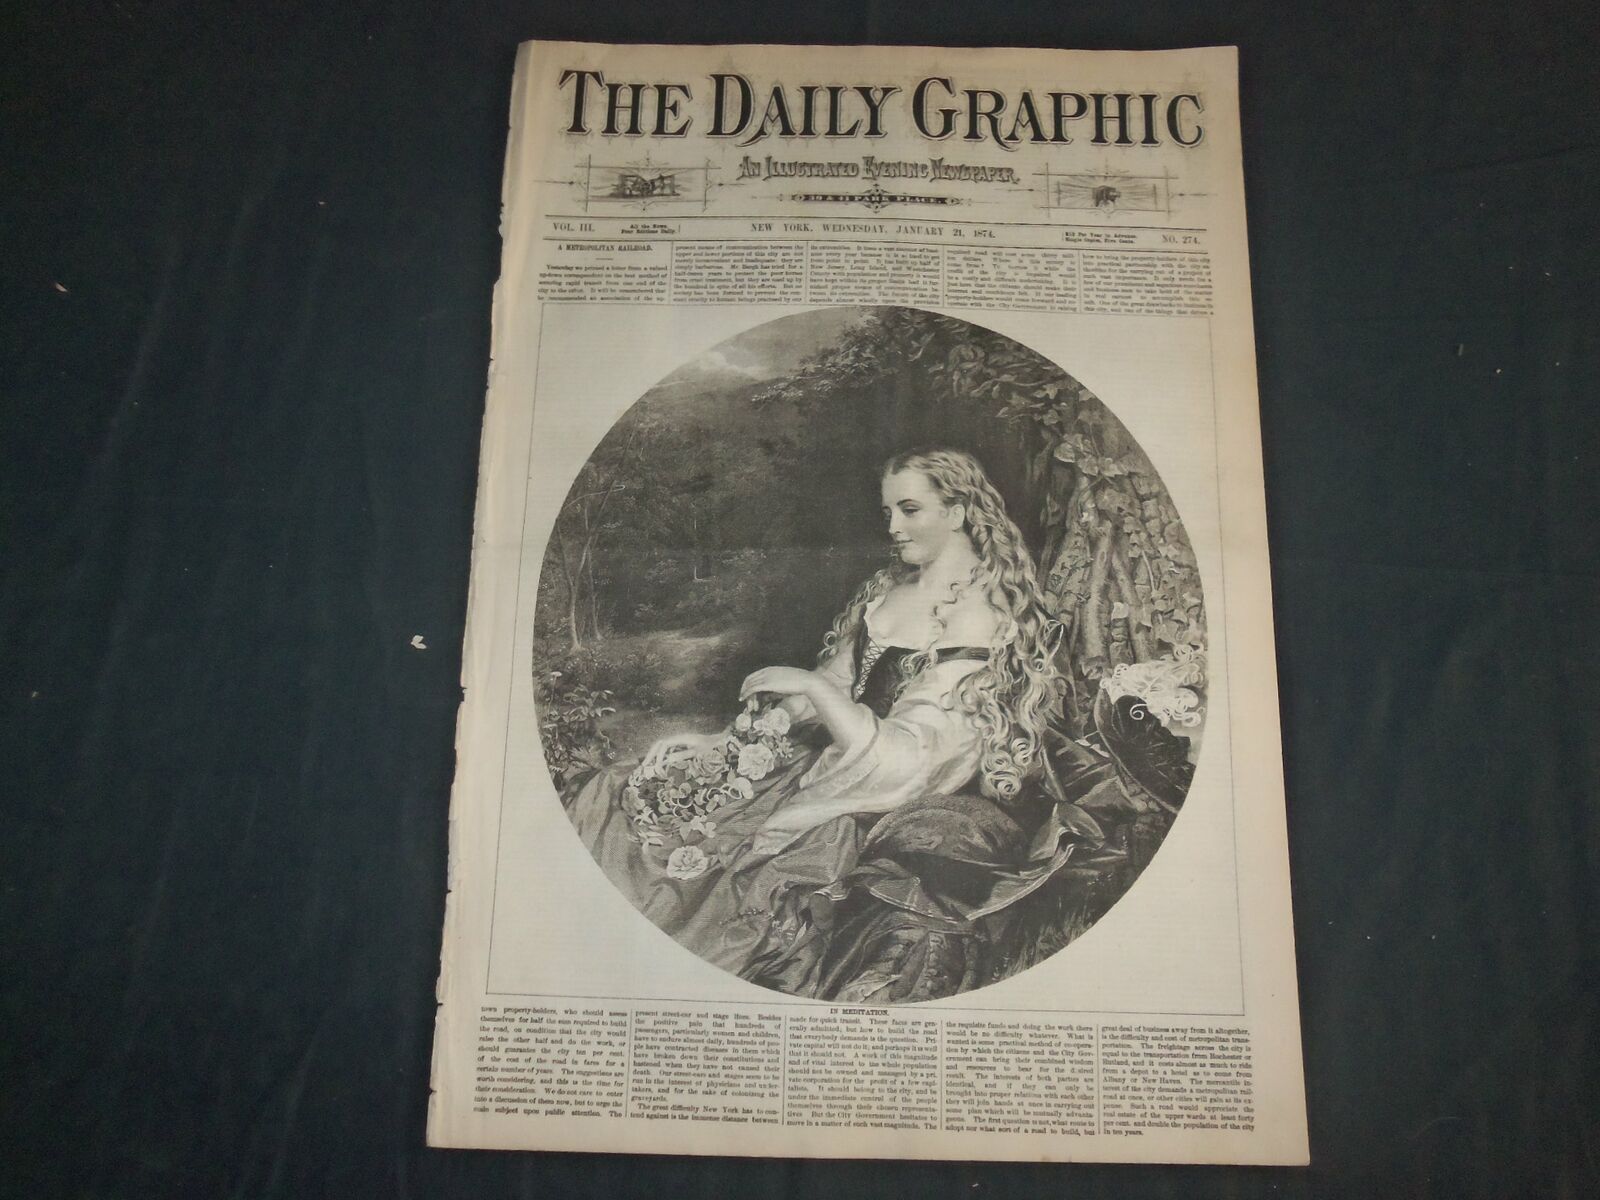 1874 JANUARY 21 THE DAILY GRAPHIC NEWSPAPER - IN MEDITATION - NT 7645